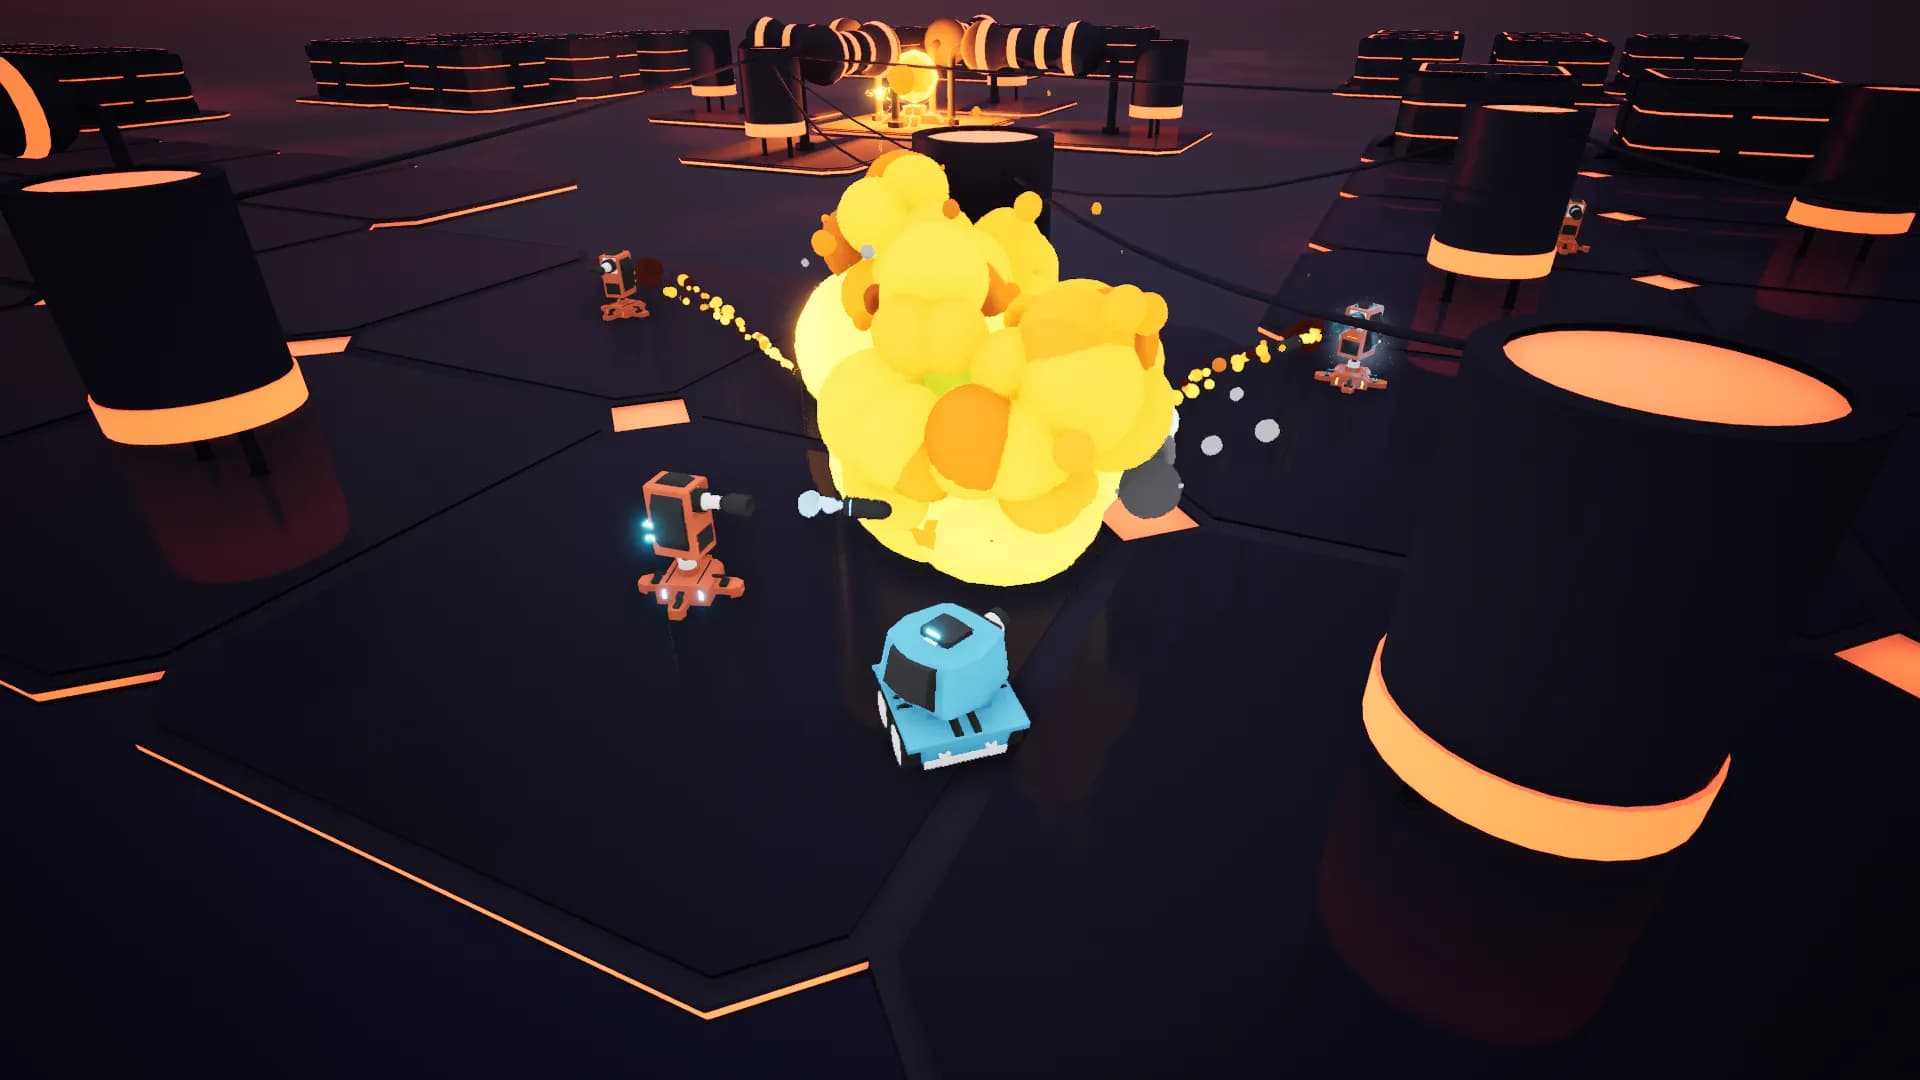 Screenshot 2: Tank being launched at with fire projectiles